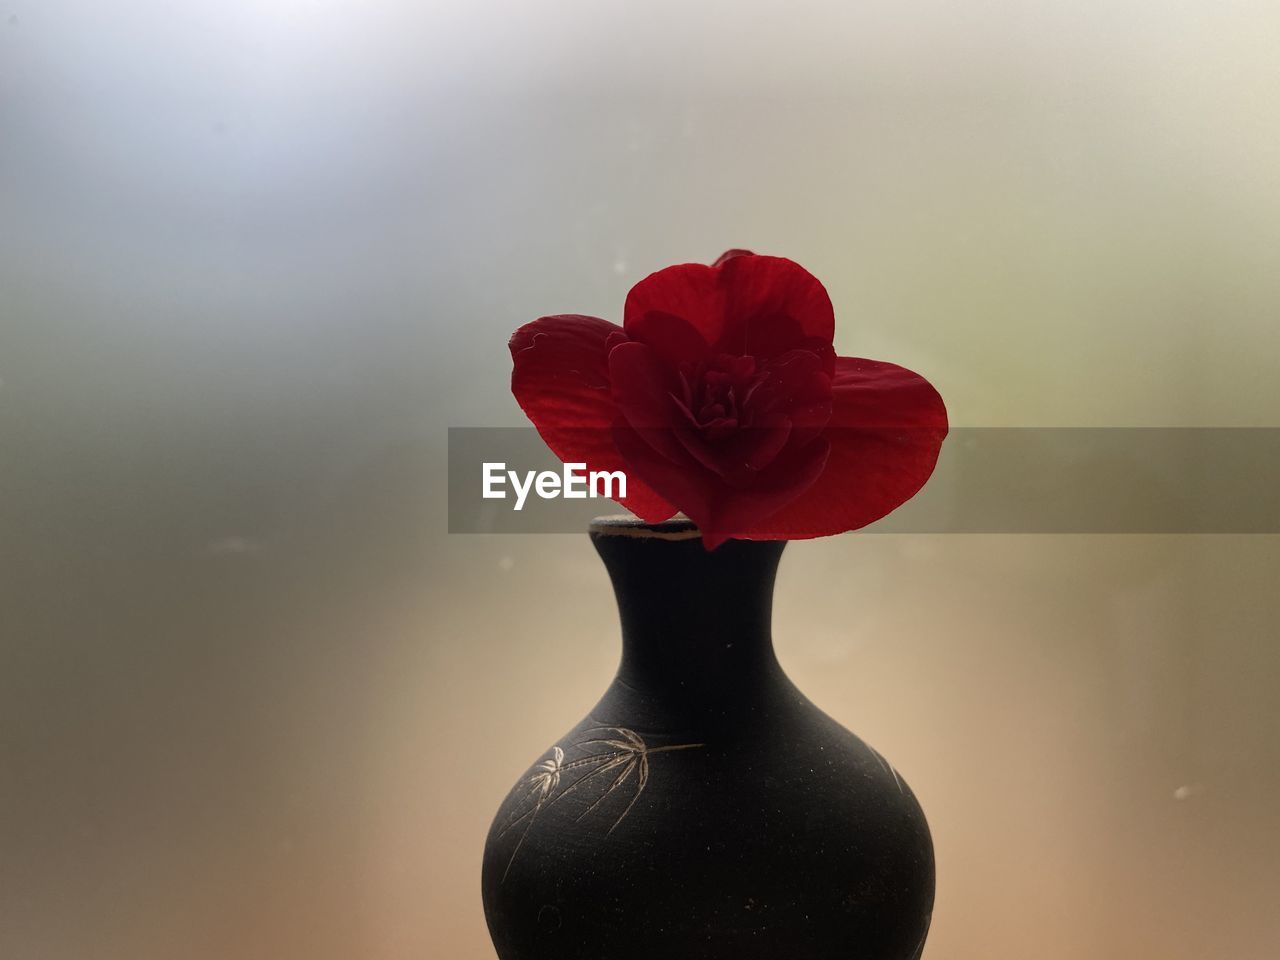 CLOSE-UP OF RED ROSE IN VASE AGAINST WALL